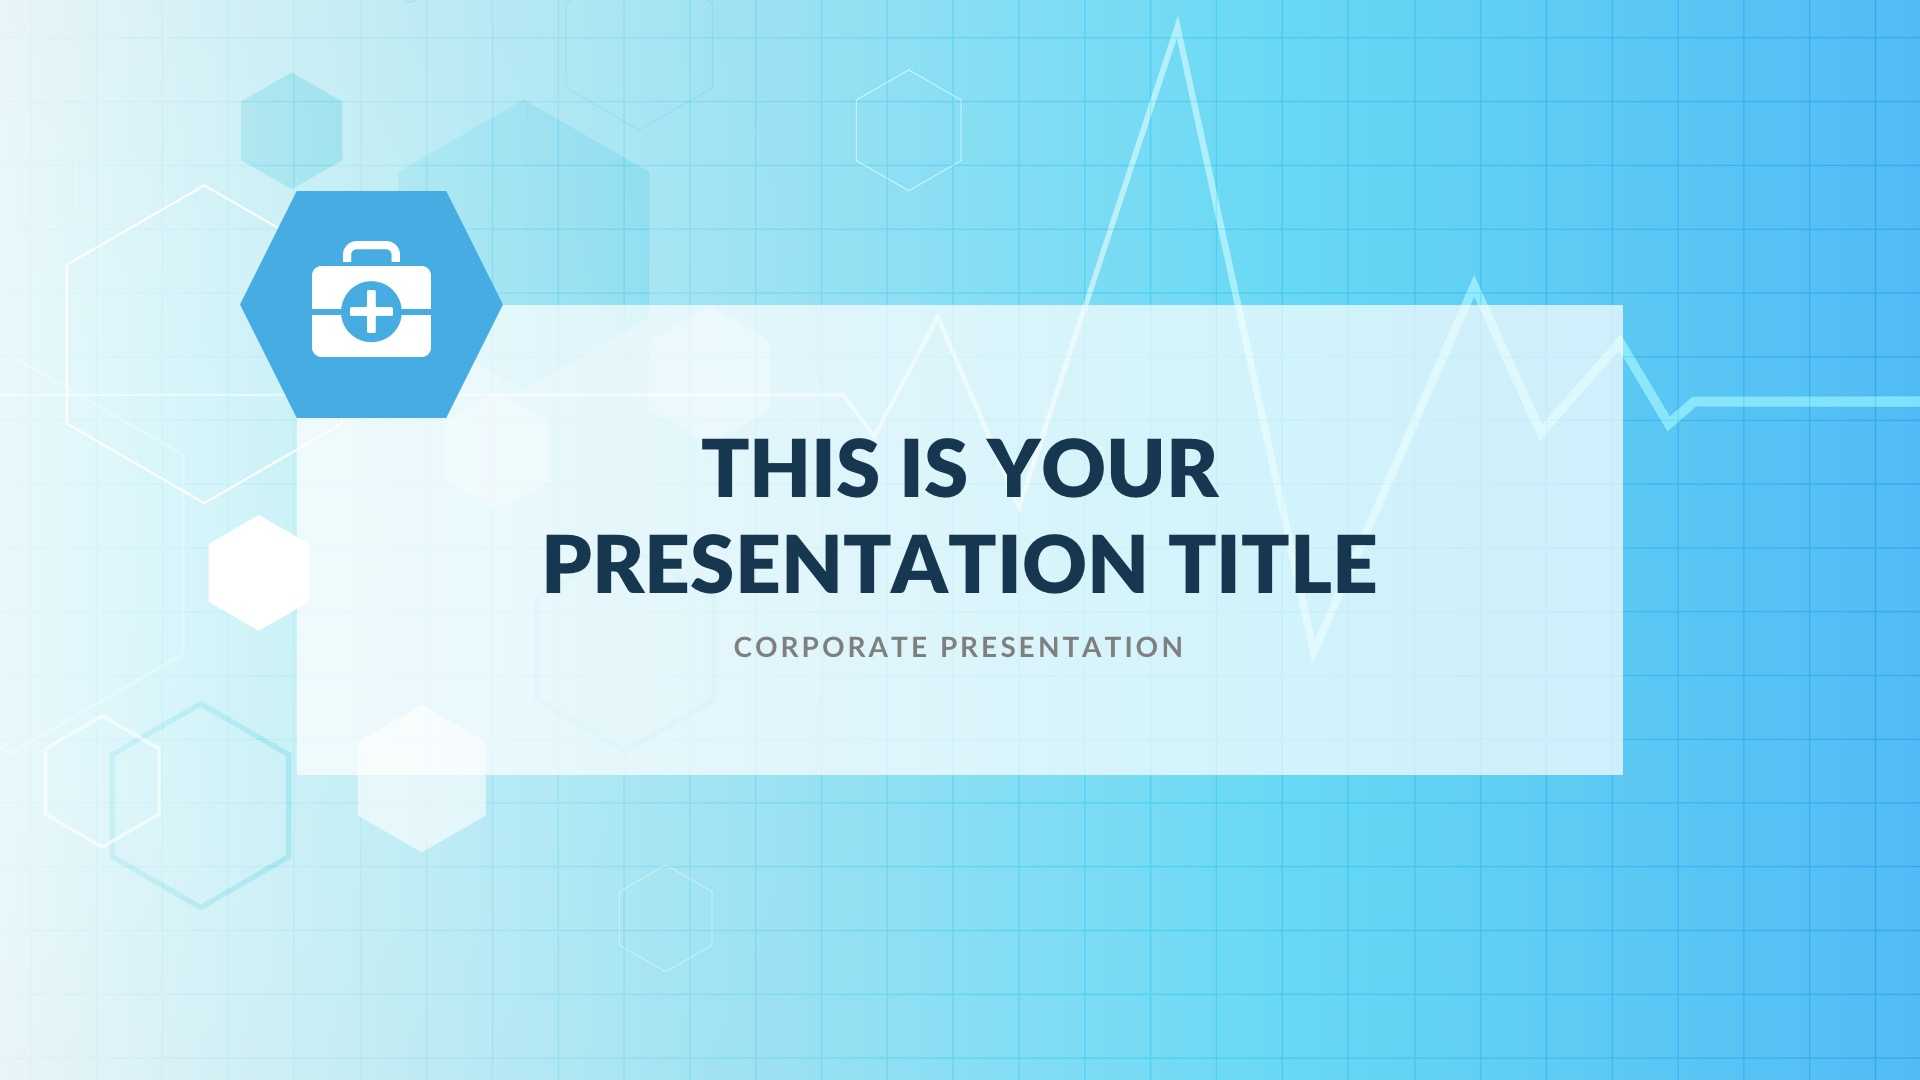 Alpha Medical Free Presentation Template With Free Nursing Powerpoint Templates